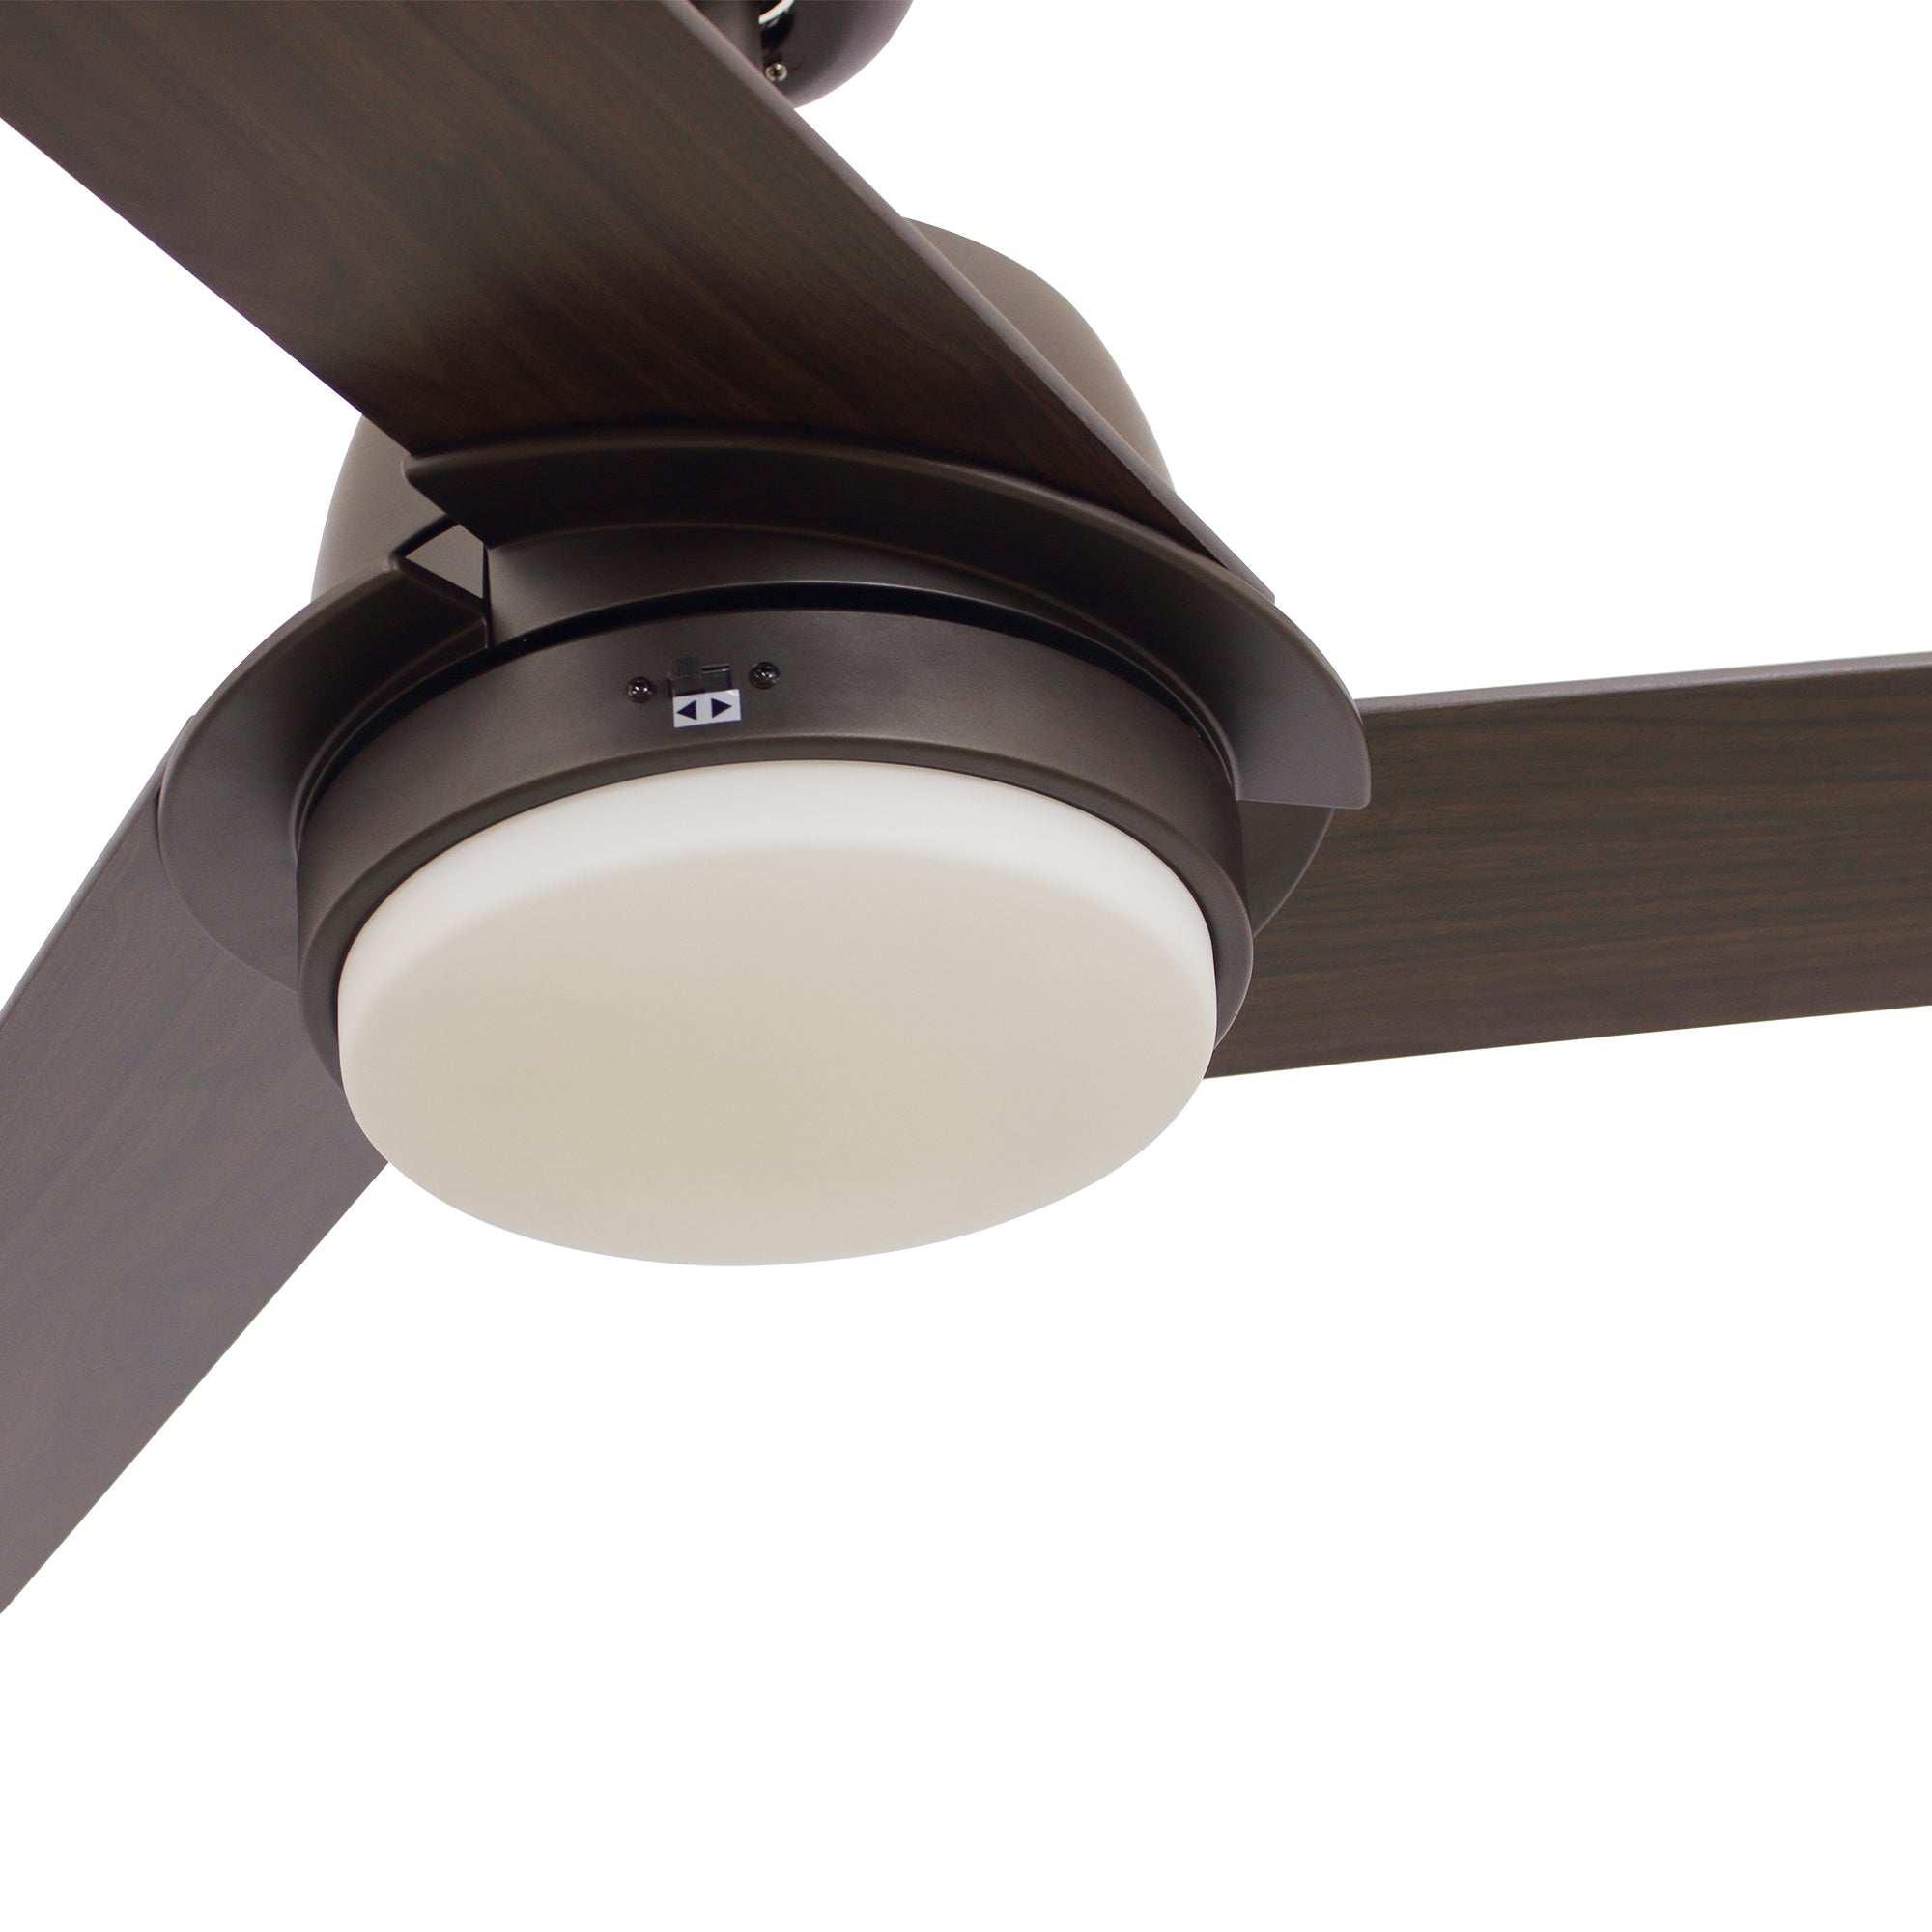 This Smafan Addison 52&#39;&#39; Smart Ceiling Fan keeps your space cool, bright, and stylish. It is a soft modern masterpiece perfect for your large indoor living spaces. This Wifi smart ceiling fan is a simplicity designing with White finish, use elegant Plywood blades and compatible with LED Light. The fan features wall control, Wi-Fi apps, Siri Shortcut and Voice control technology (compatible with Amazon Alexa and Google Home Assistant ) to set fan preferences. 